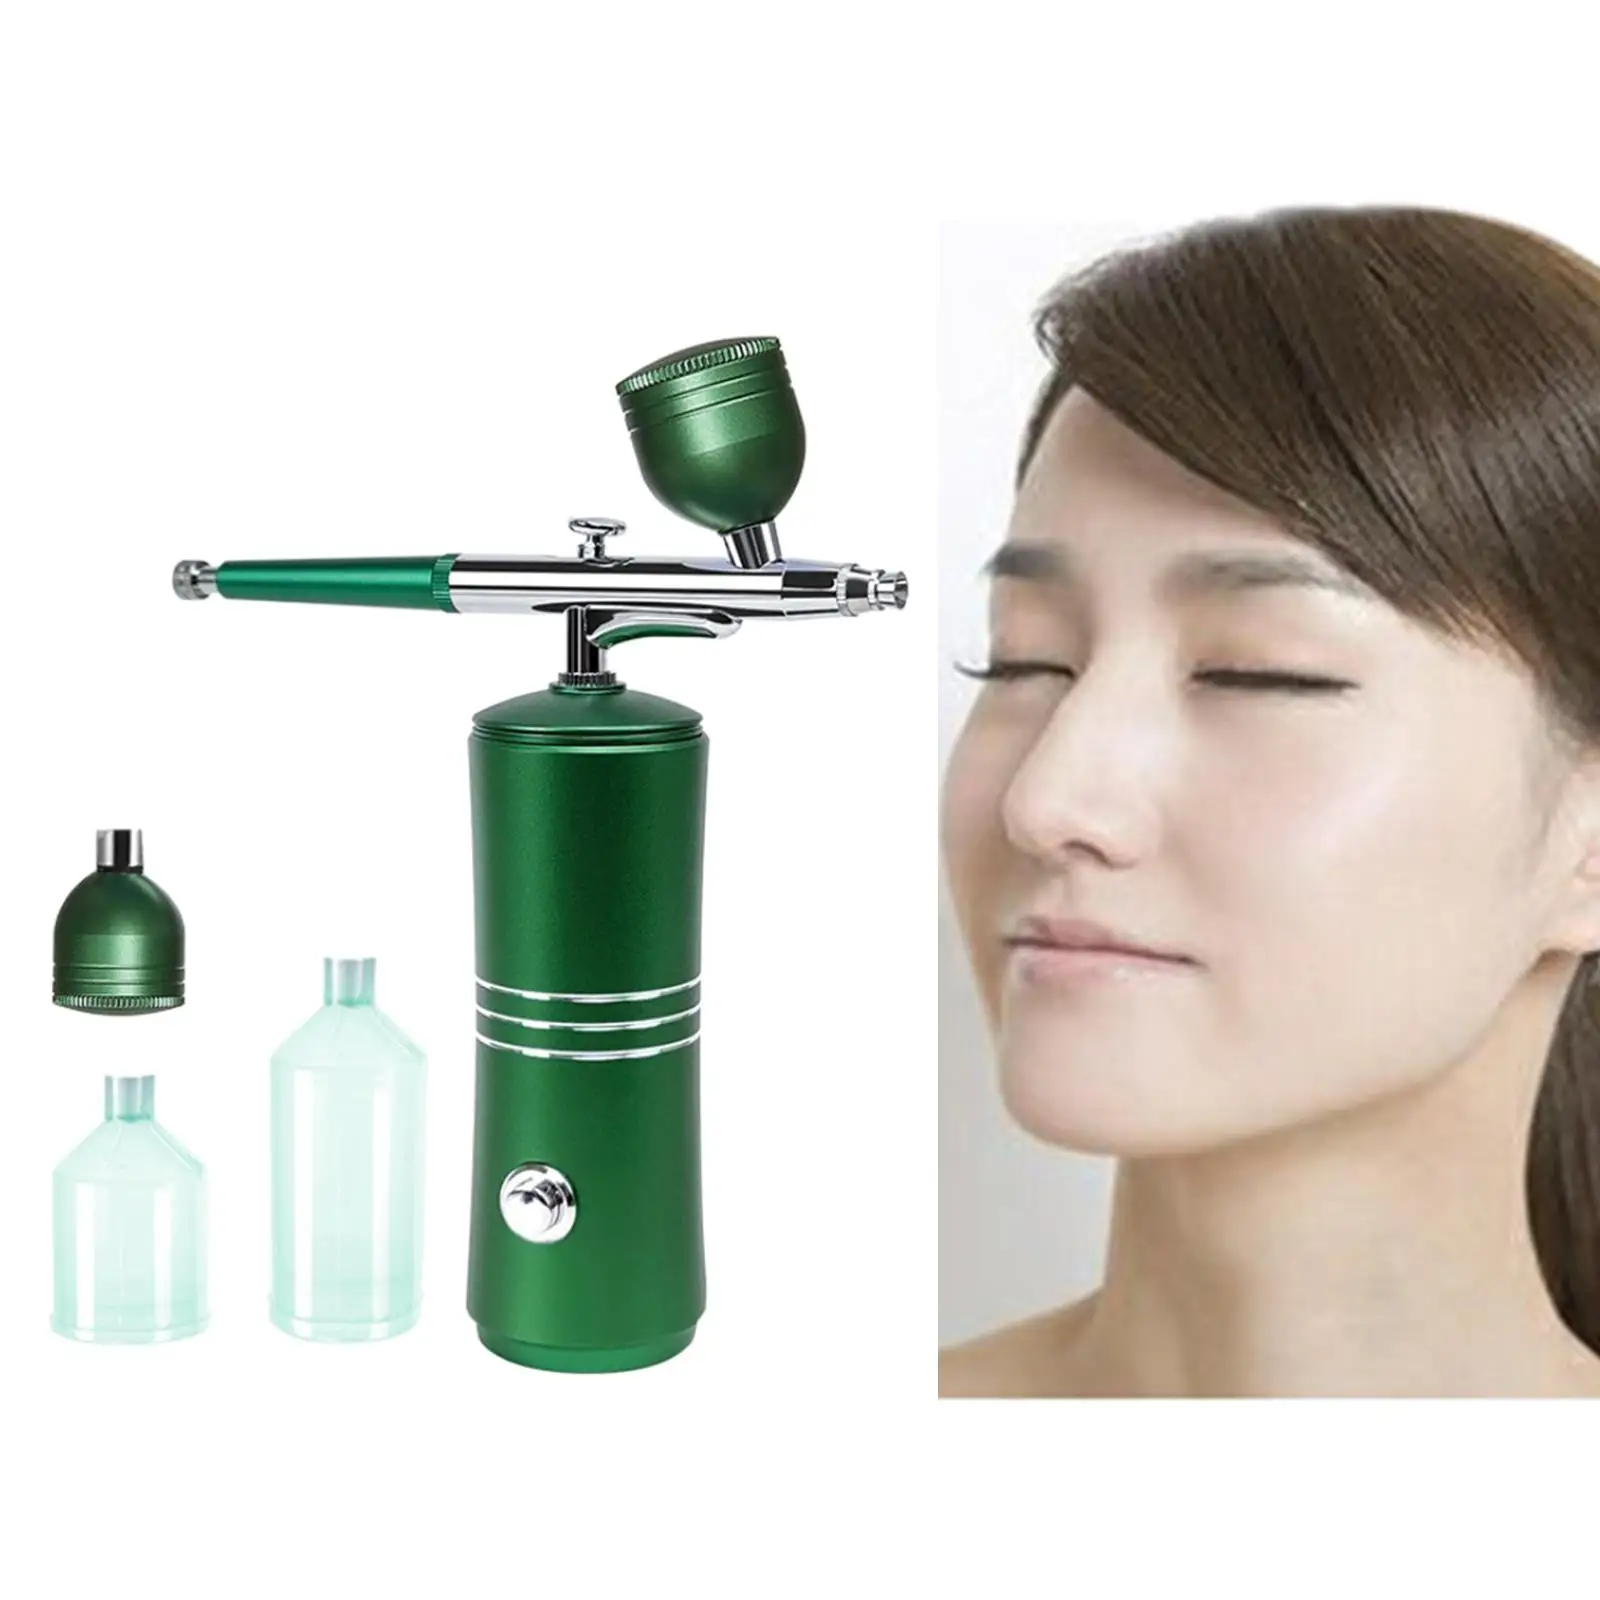 High Pressure Nano Spray Face Steamer Facial Water Oxygen Injection Instrument Portable Humidifier Airbrush For Beauty Skin Care